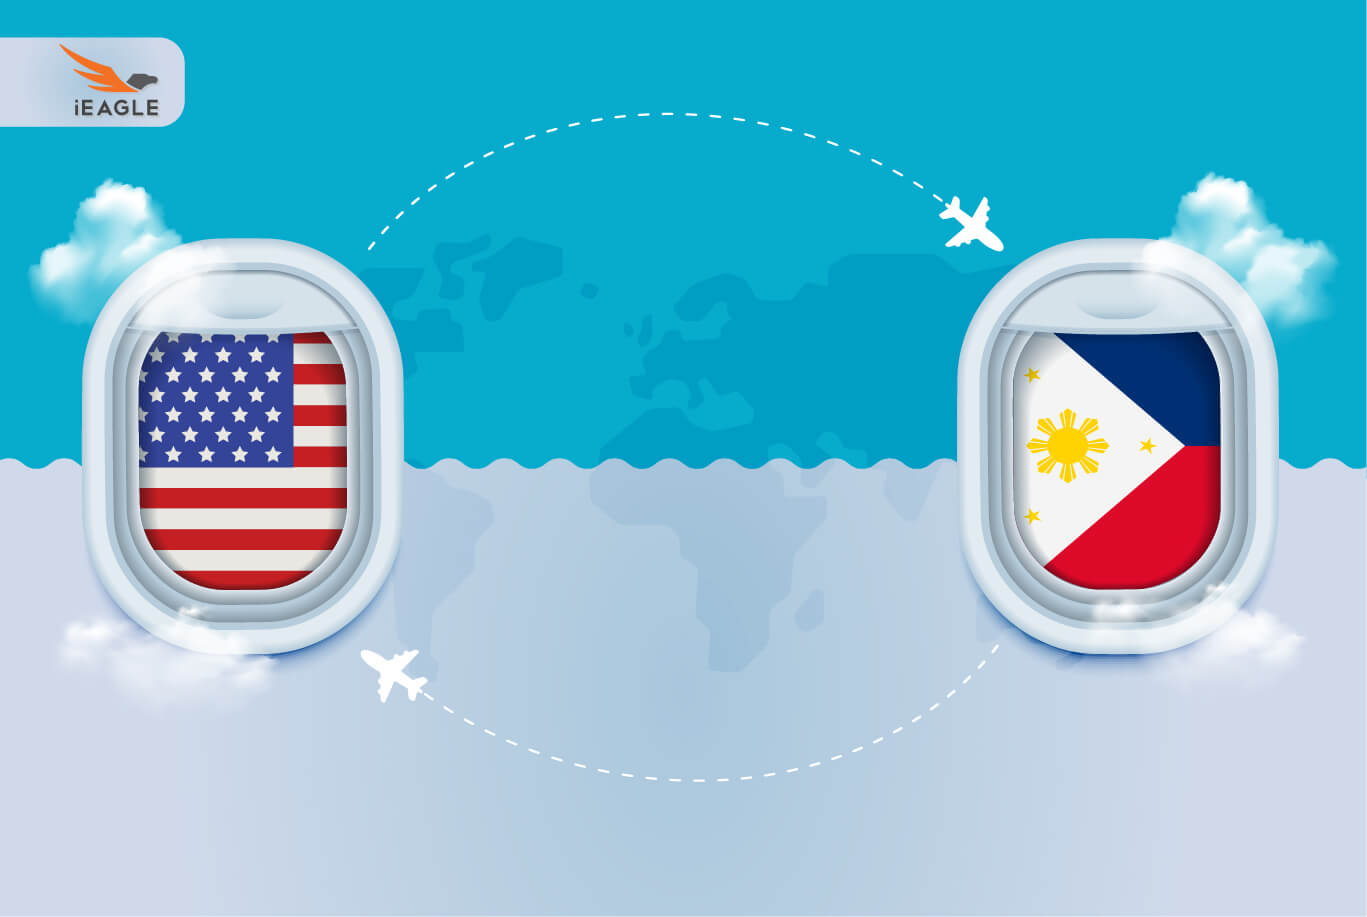 Nonstop Flights from USA to Philippines, including United Nonstop Service to Manila